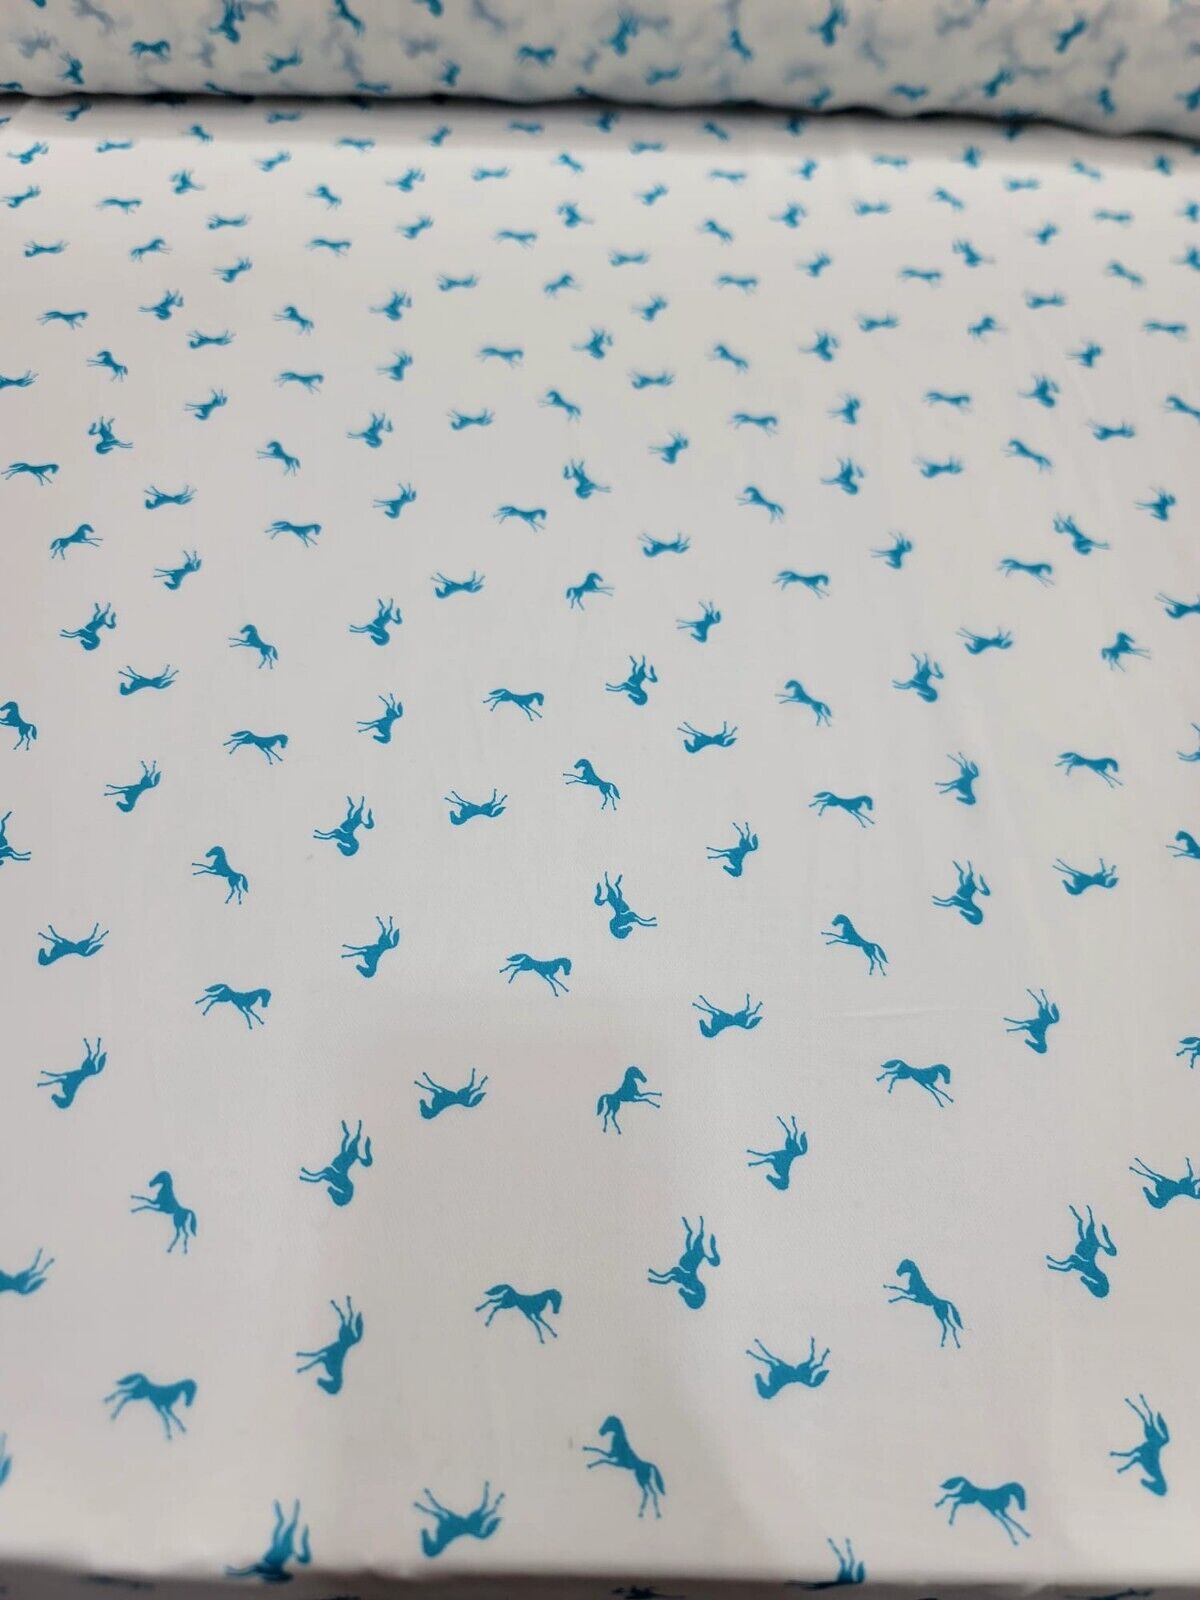 Blue Horses Premium Chiffon Fabric - 58-60" Width - Sold by the Yard